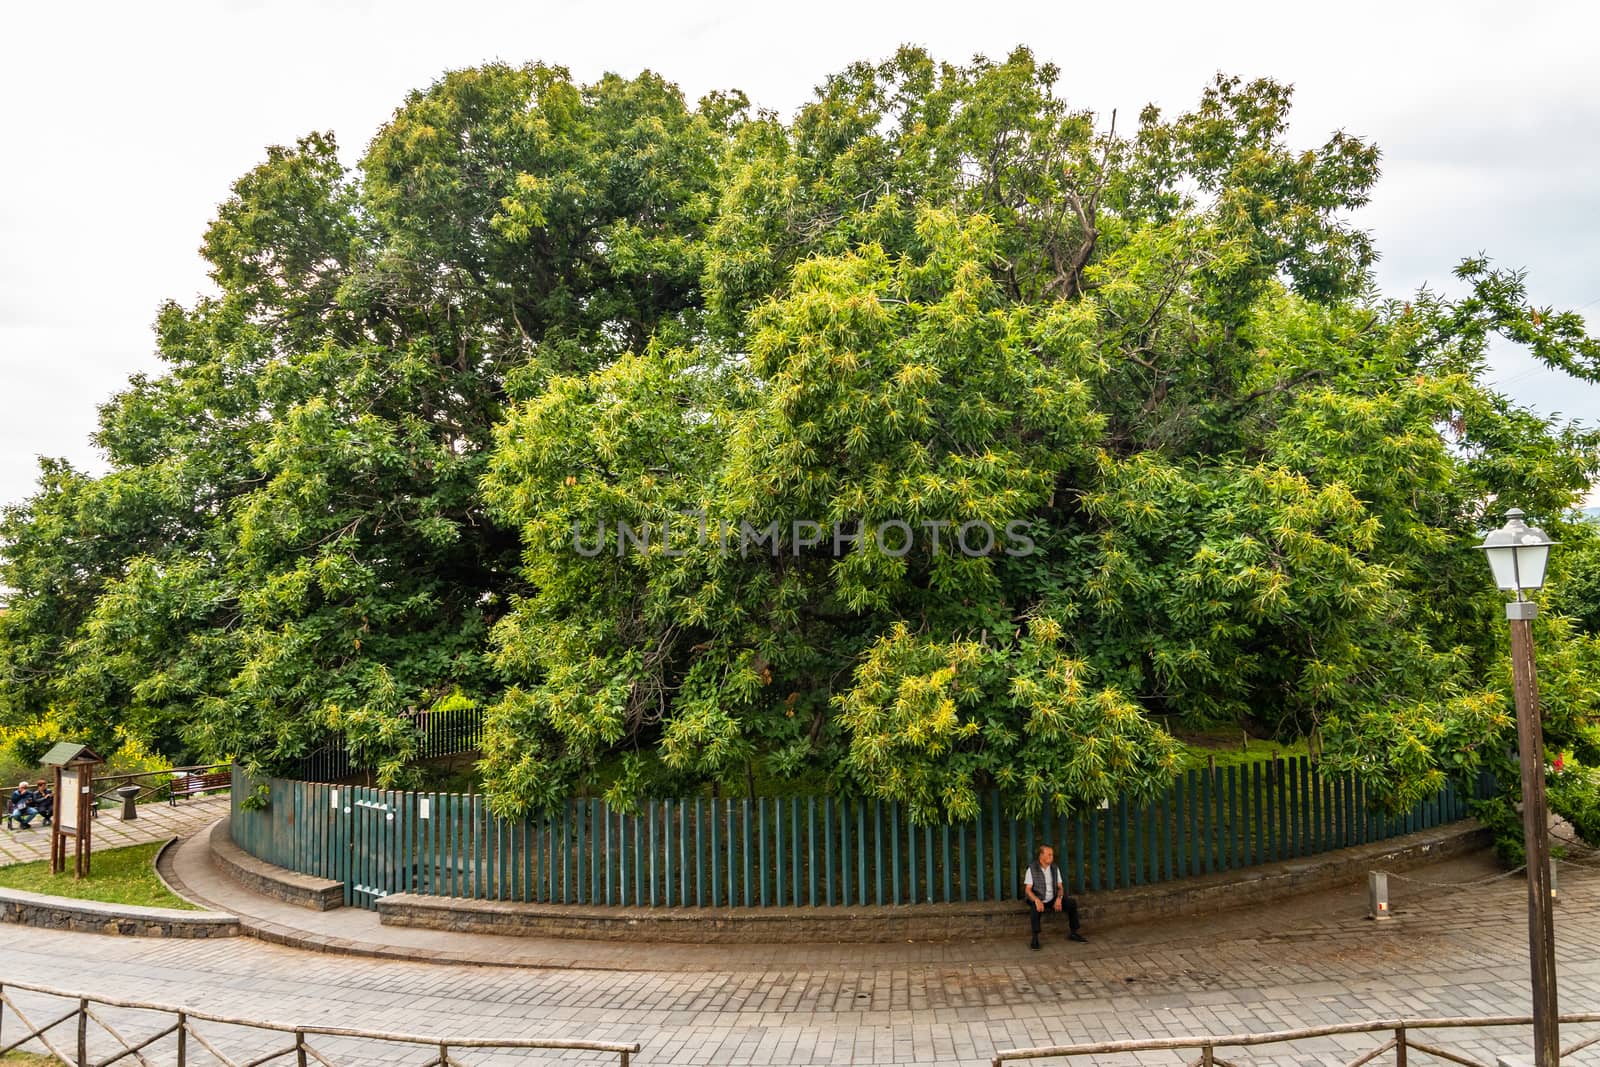 The Hundred-Horse Chestnut in Sant'Alfio, Catania, Sicily. It is the largest and oldest known chestnut tree in the world